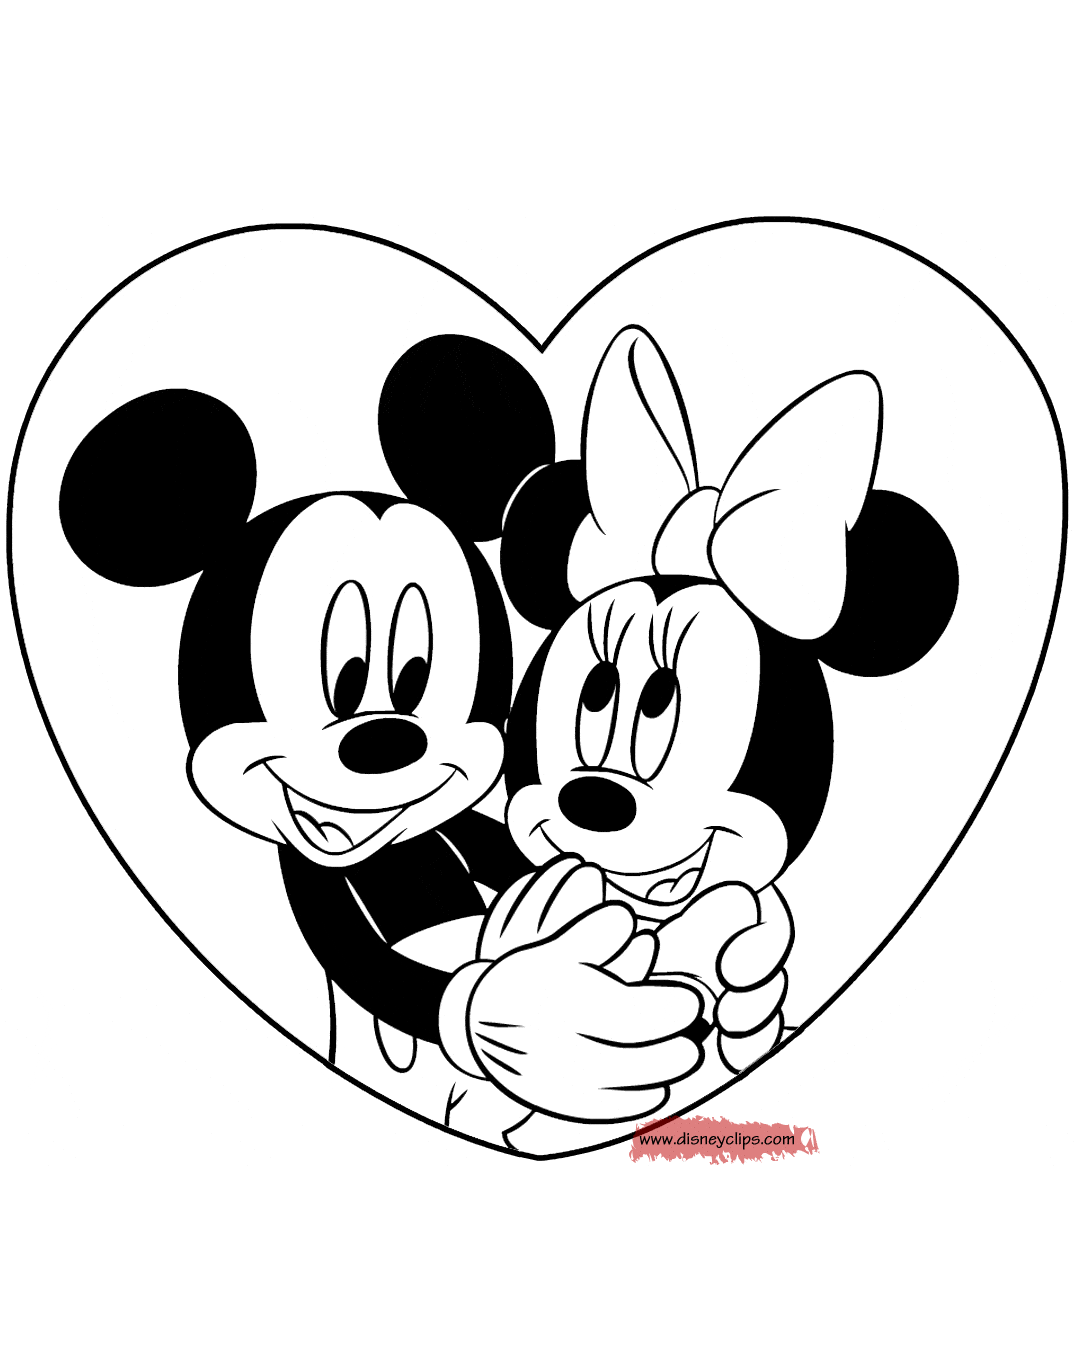 Download Disney Valentine's Day Coloring Pages (2) | Disneyclips.com